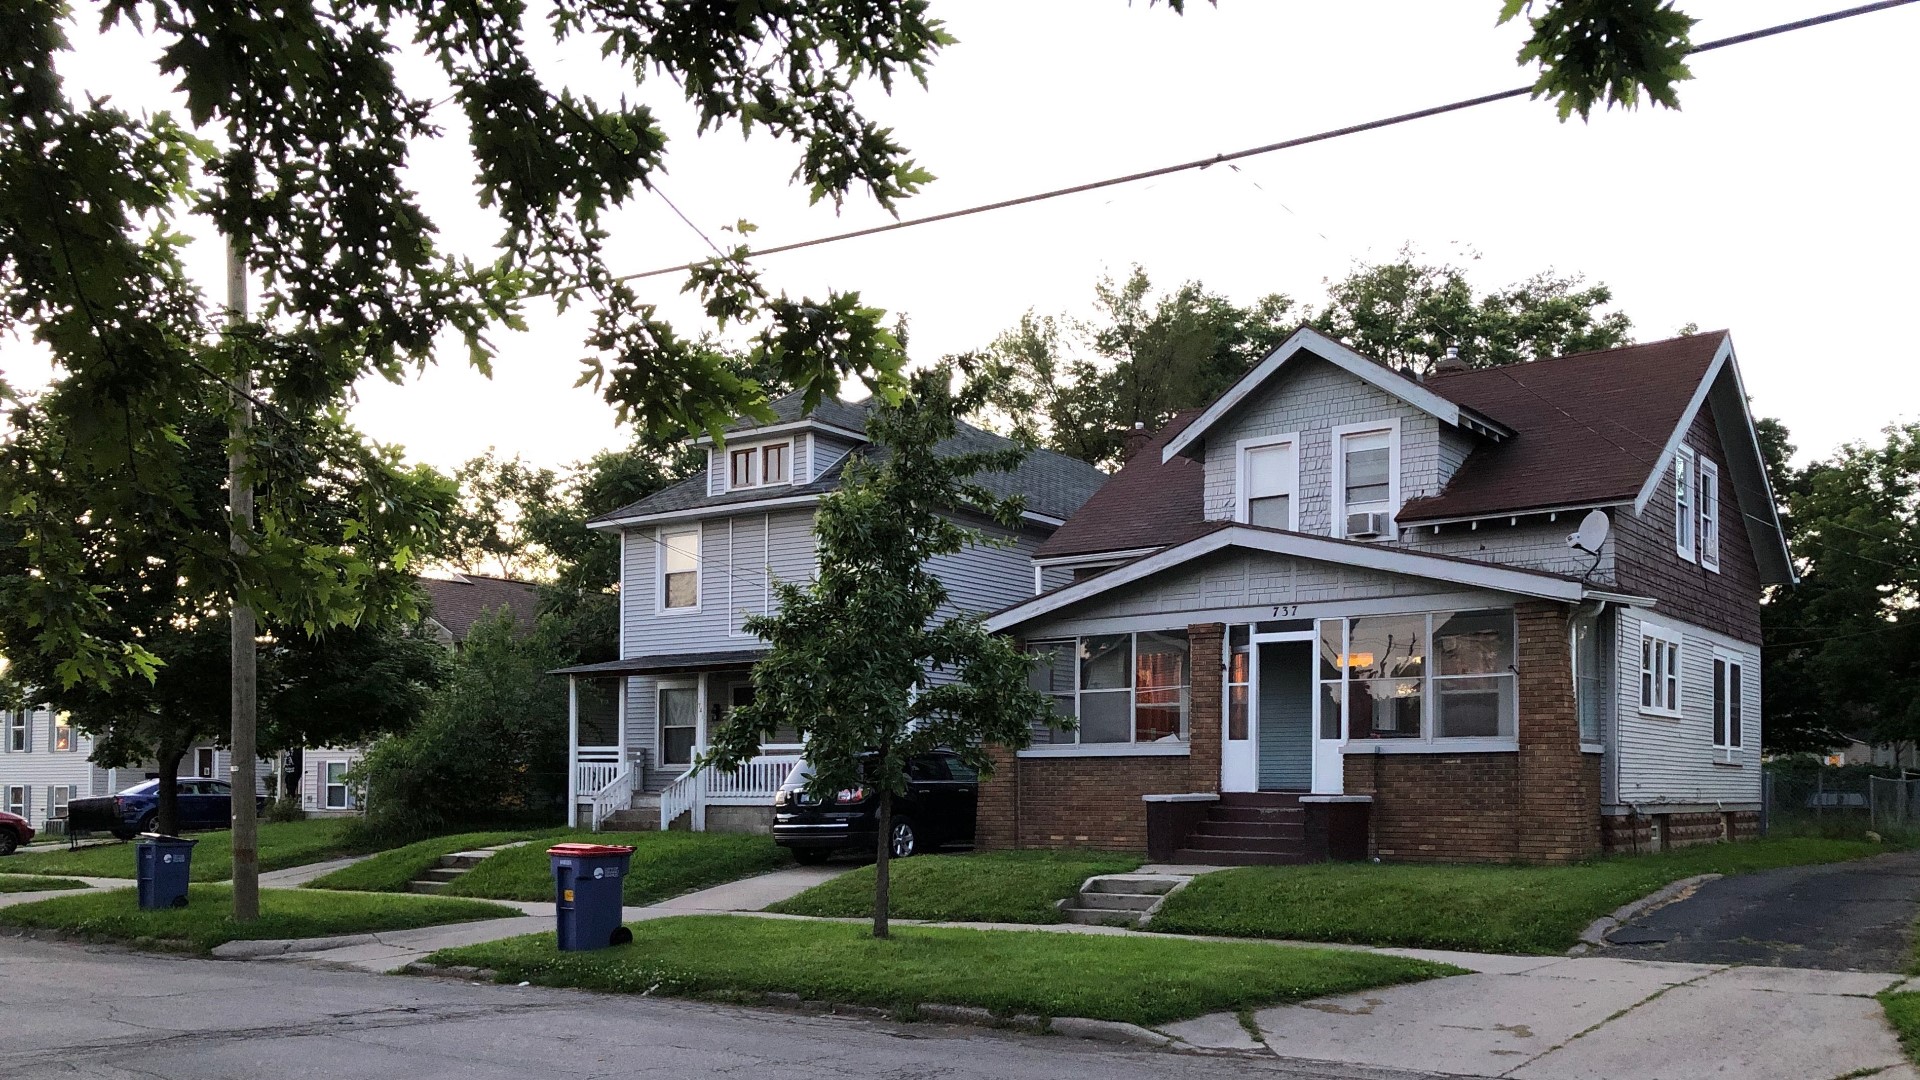 Since Saturday, there have been a total of nine separate shooting incidents in Grand Rapids -- four of them happening all in the same day. The latest occurred on the southwest side around 8 p.m. Two houses were hit by gunfire.